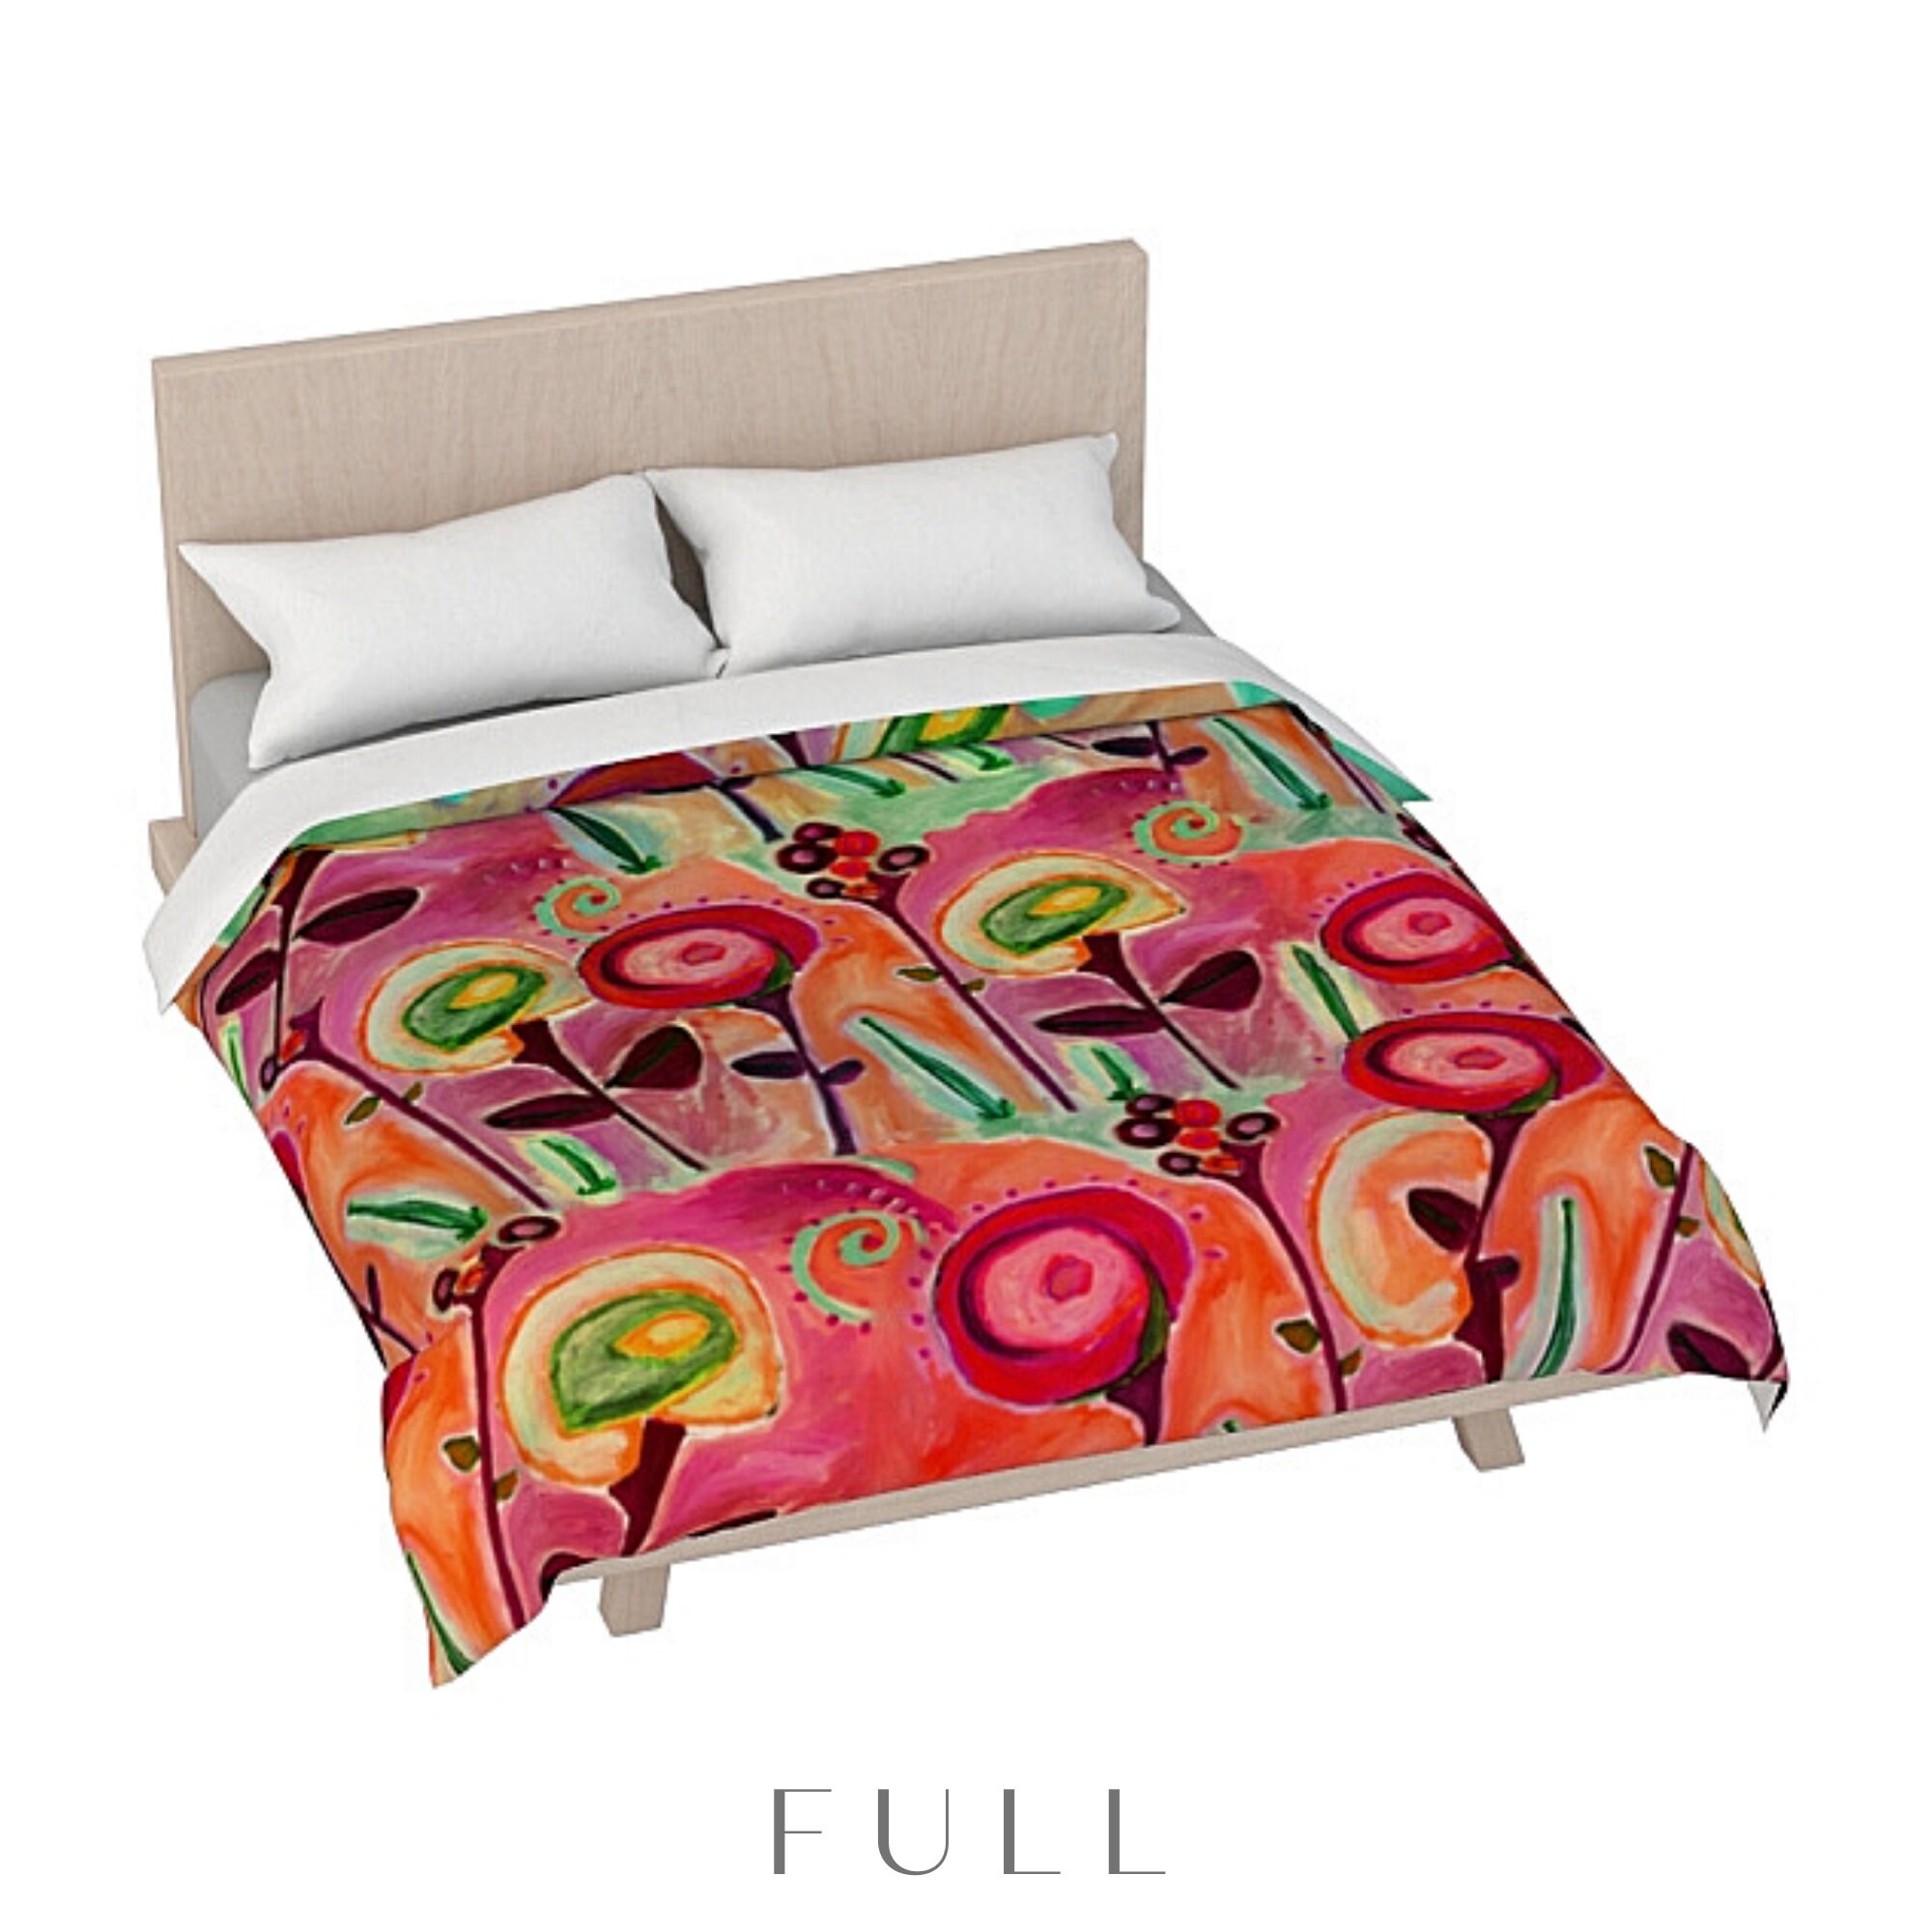 Colorful Queen Duvet King Bedding Abstract Bed Cover Designer Art